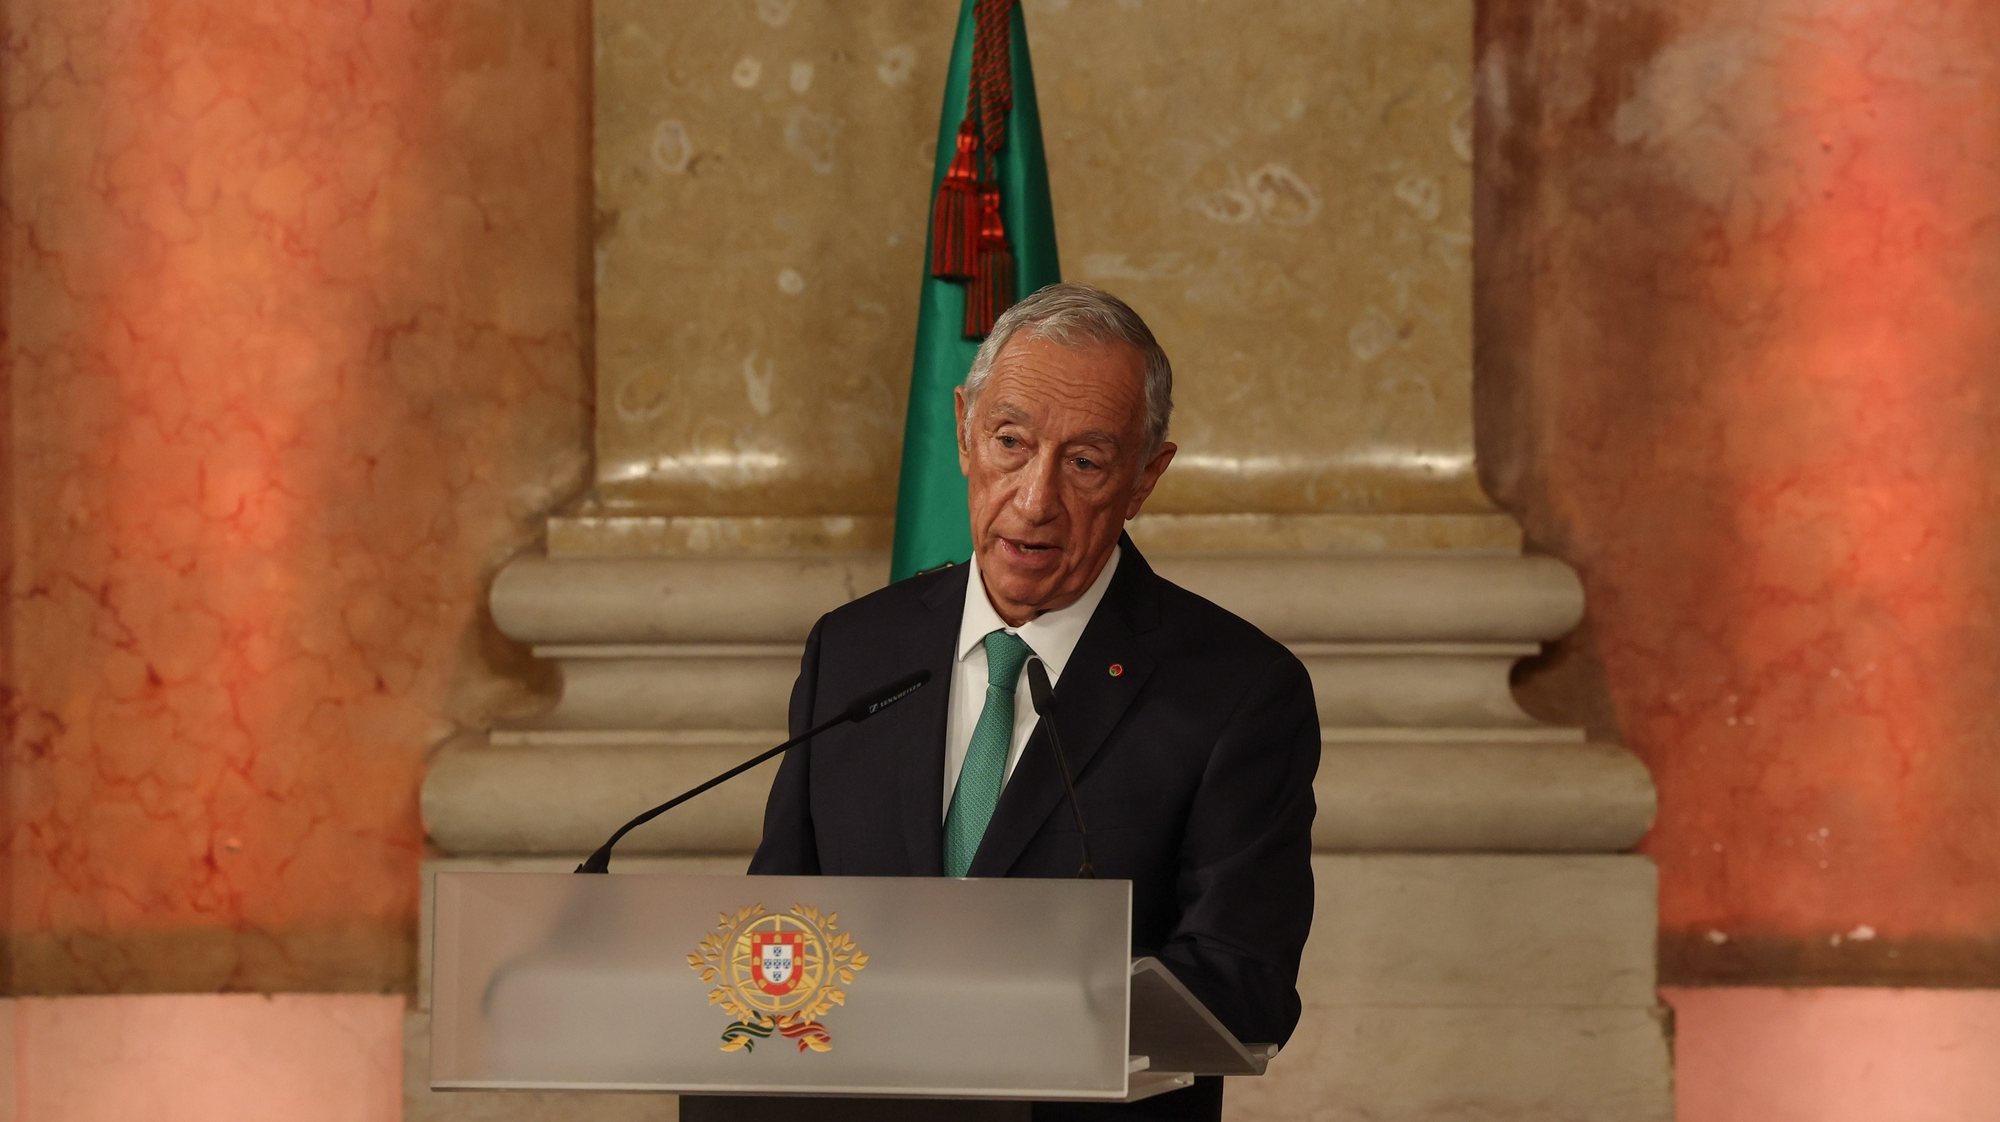 Portuguese President Marcelo Rebelo de Sousa, speaks during the swearing in cerimony of the XXIV Constitutional Government held at Ajuda Palace, in Lisbon, Portugal, 02 April March 2024. These legislative elections resulted in the victory of AD - a pre-election coalition formed by PSD, CDS-PP and People&#039;s Monarchist Party (PPM) - by around 54,000 votes (0.85%) more than the PS, the narrowest margin in the history of Portuguese democracy. The two coalitions led by the PSD (the AD on the mainland and in the Azores, and Madeira Primeiro with the PSD and CDS-PP in Madeira) - won 28.83% of the votes and 80 members of parliament (78 for the PSD and two from the CDS-PP), according to the official results. The PS was the second-most-voted party with 27.98% and 78 MPs. JOAO RELVAS/LUSA